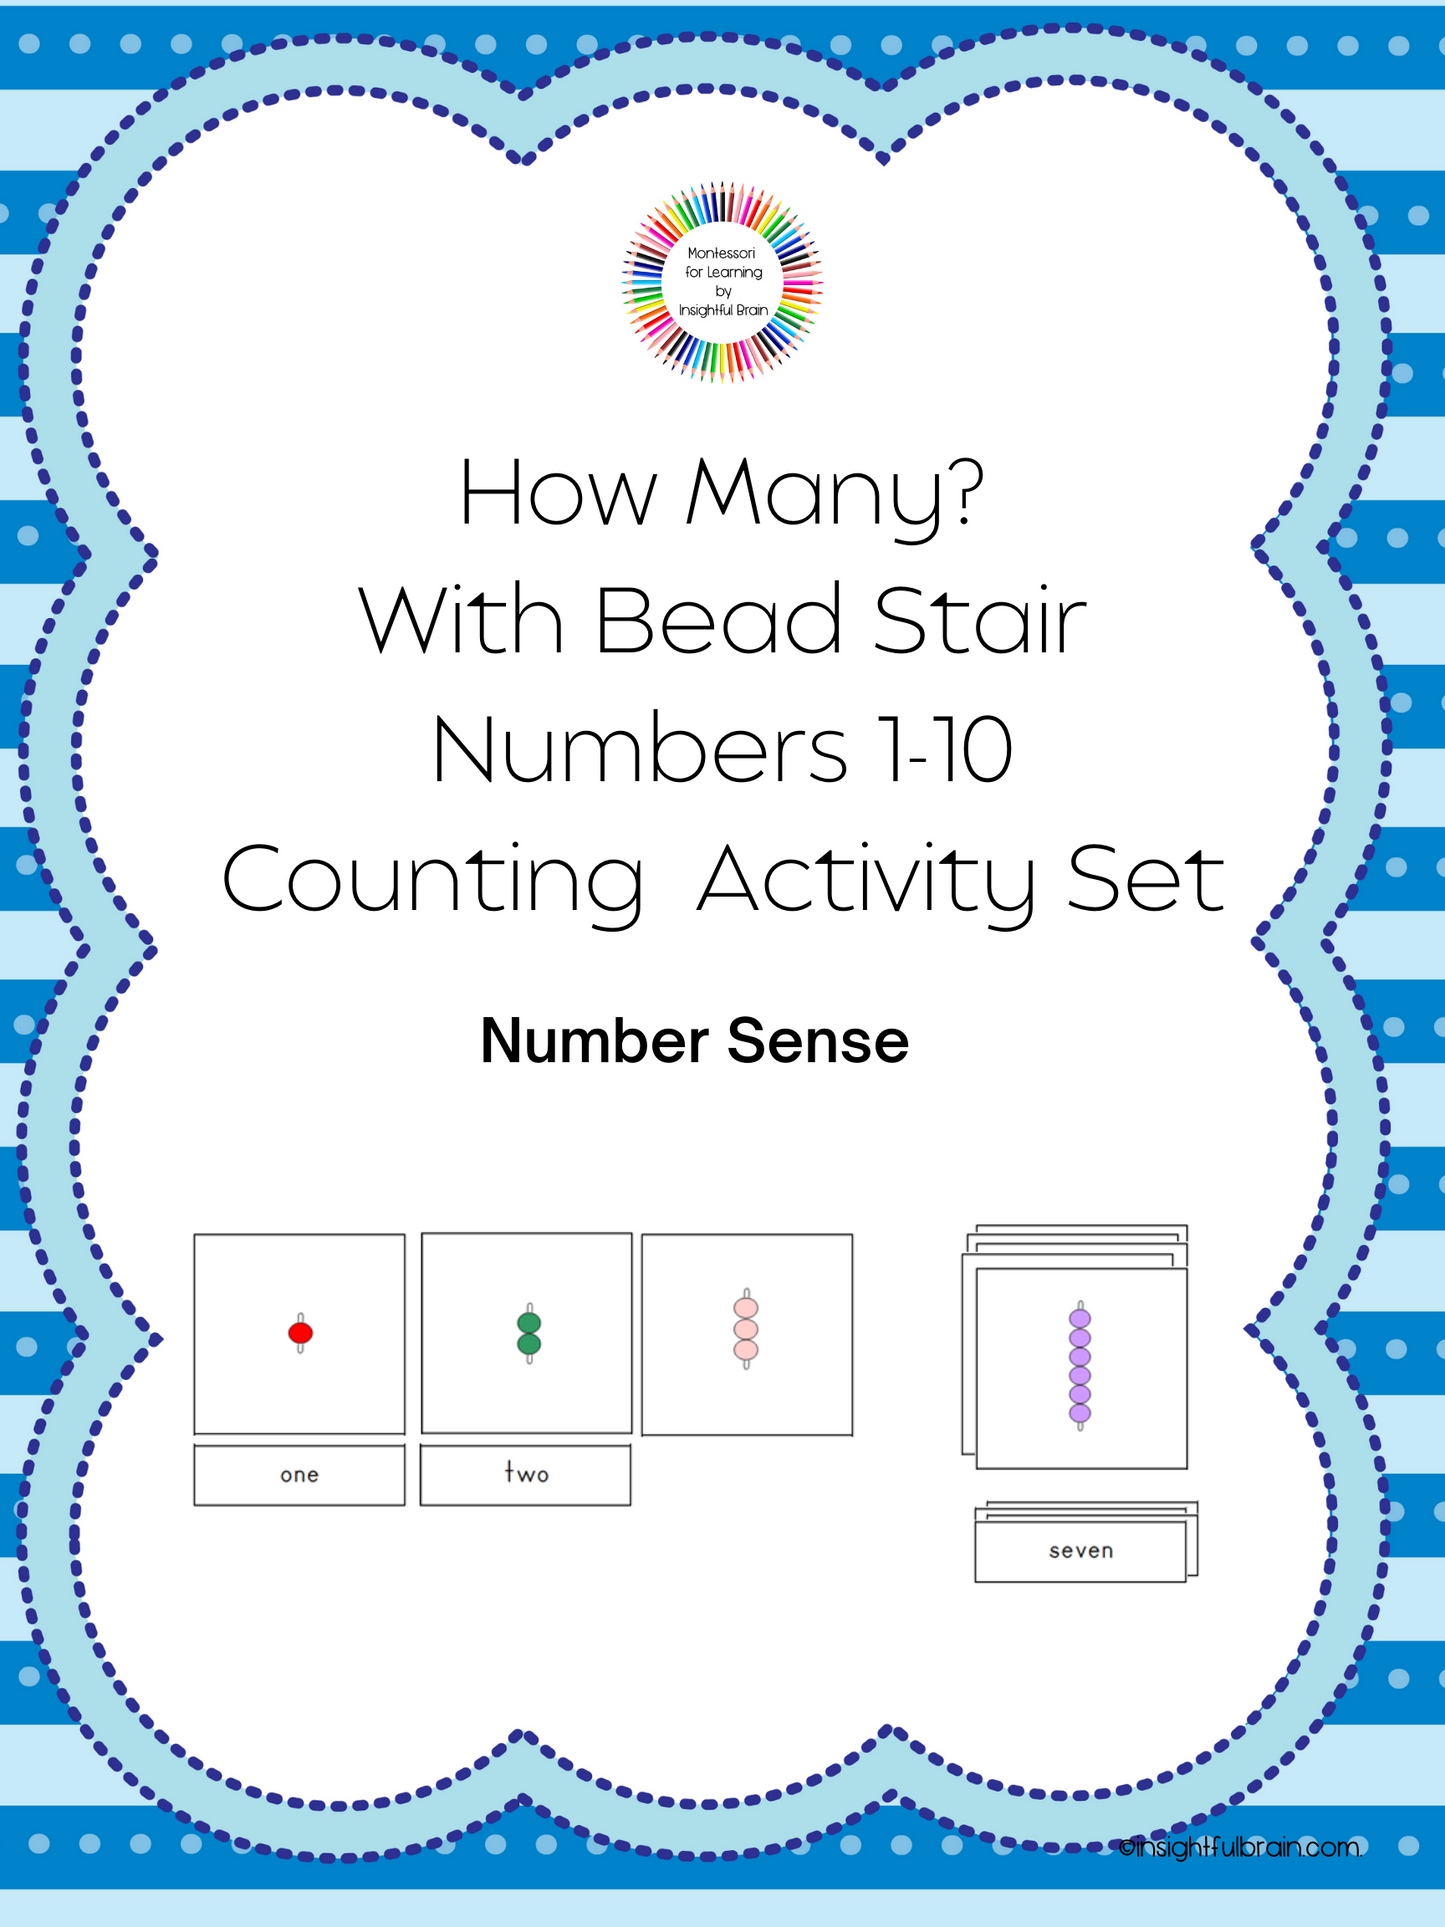 How Many? With Bead Stair Counting 1-10 Activity Set